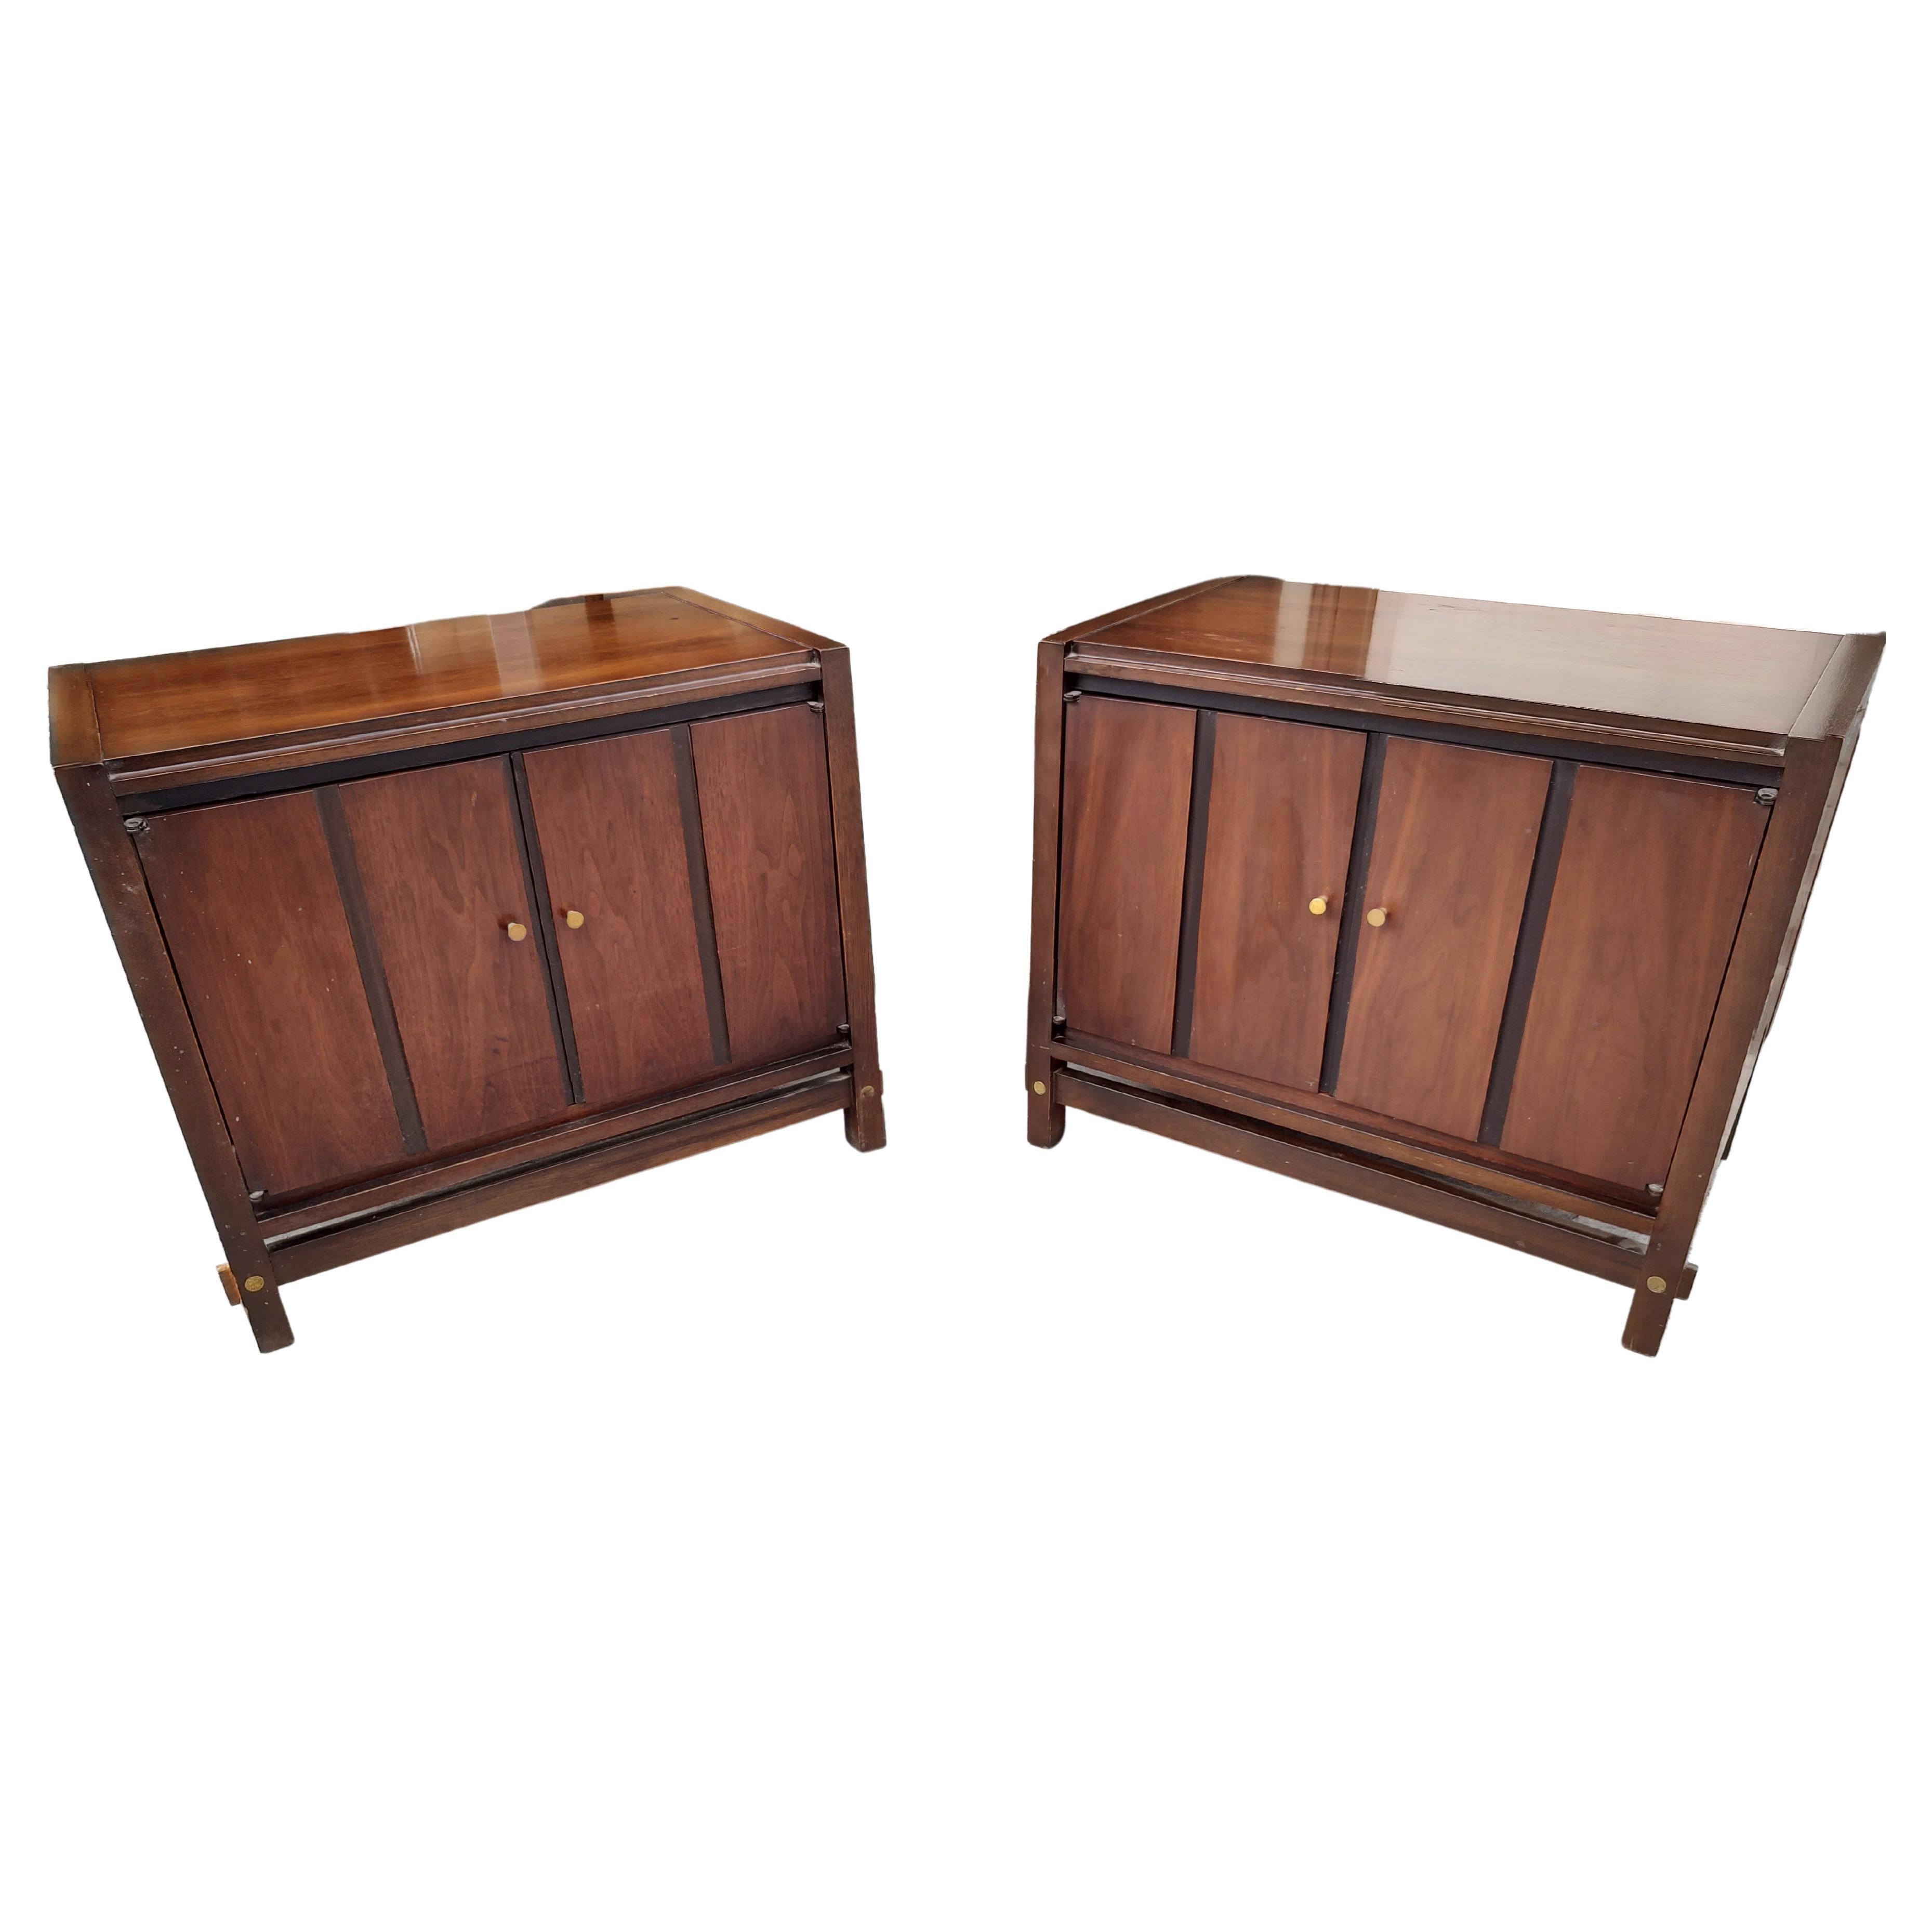 Pair of Mid Century Modern Night Tables by Lane C 1965 For Sale